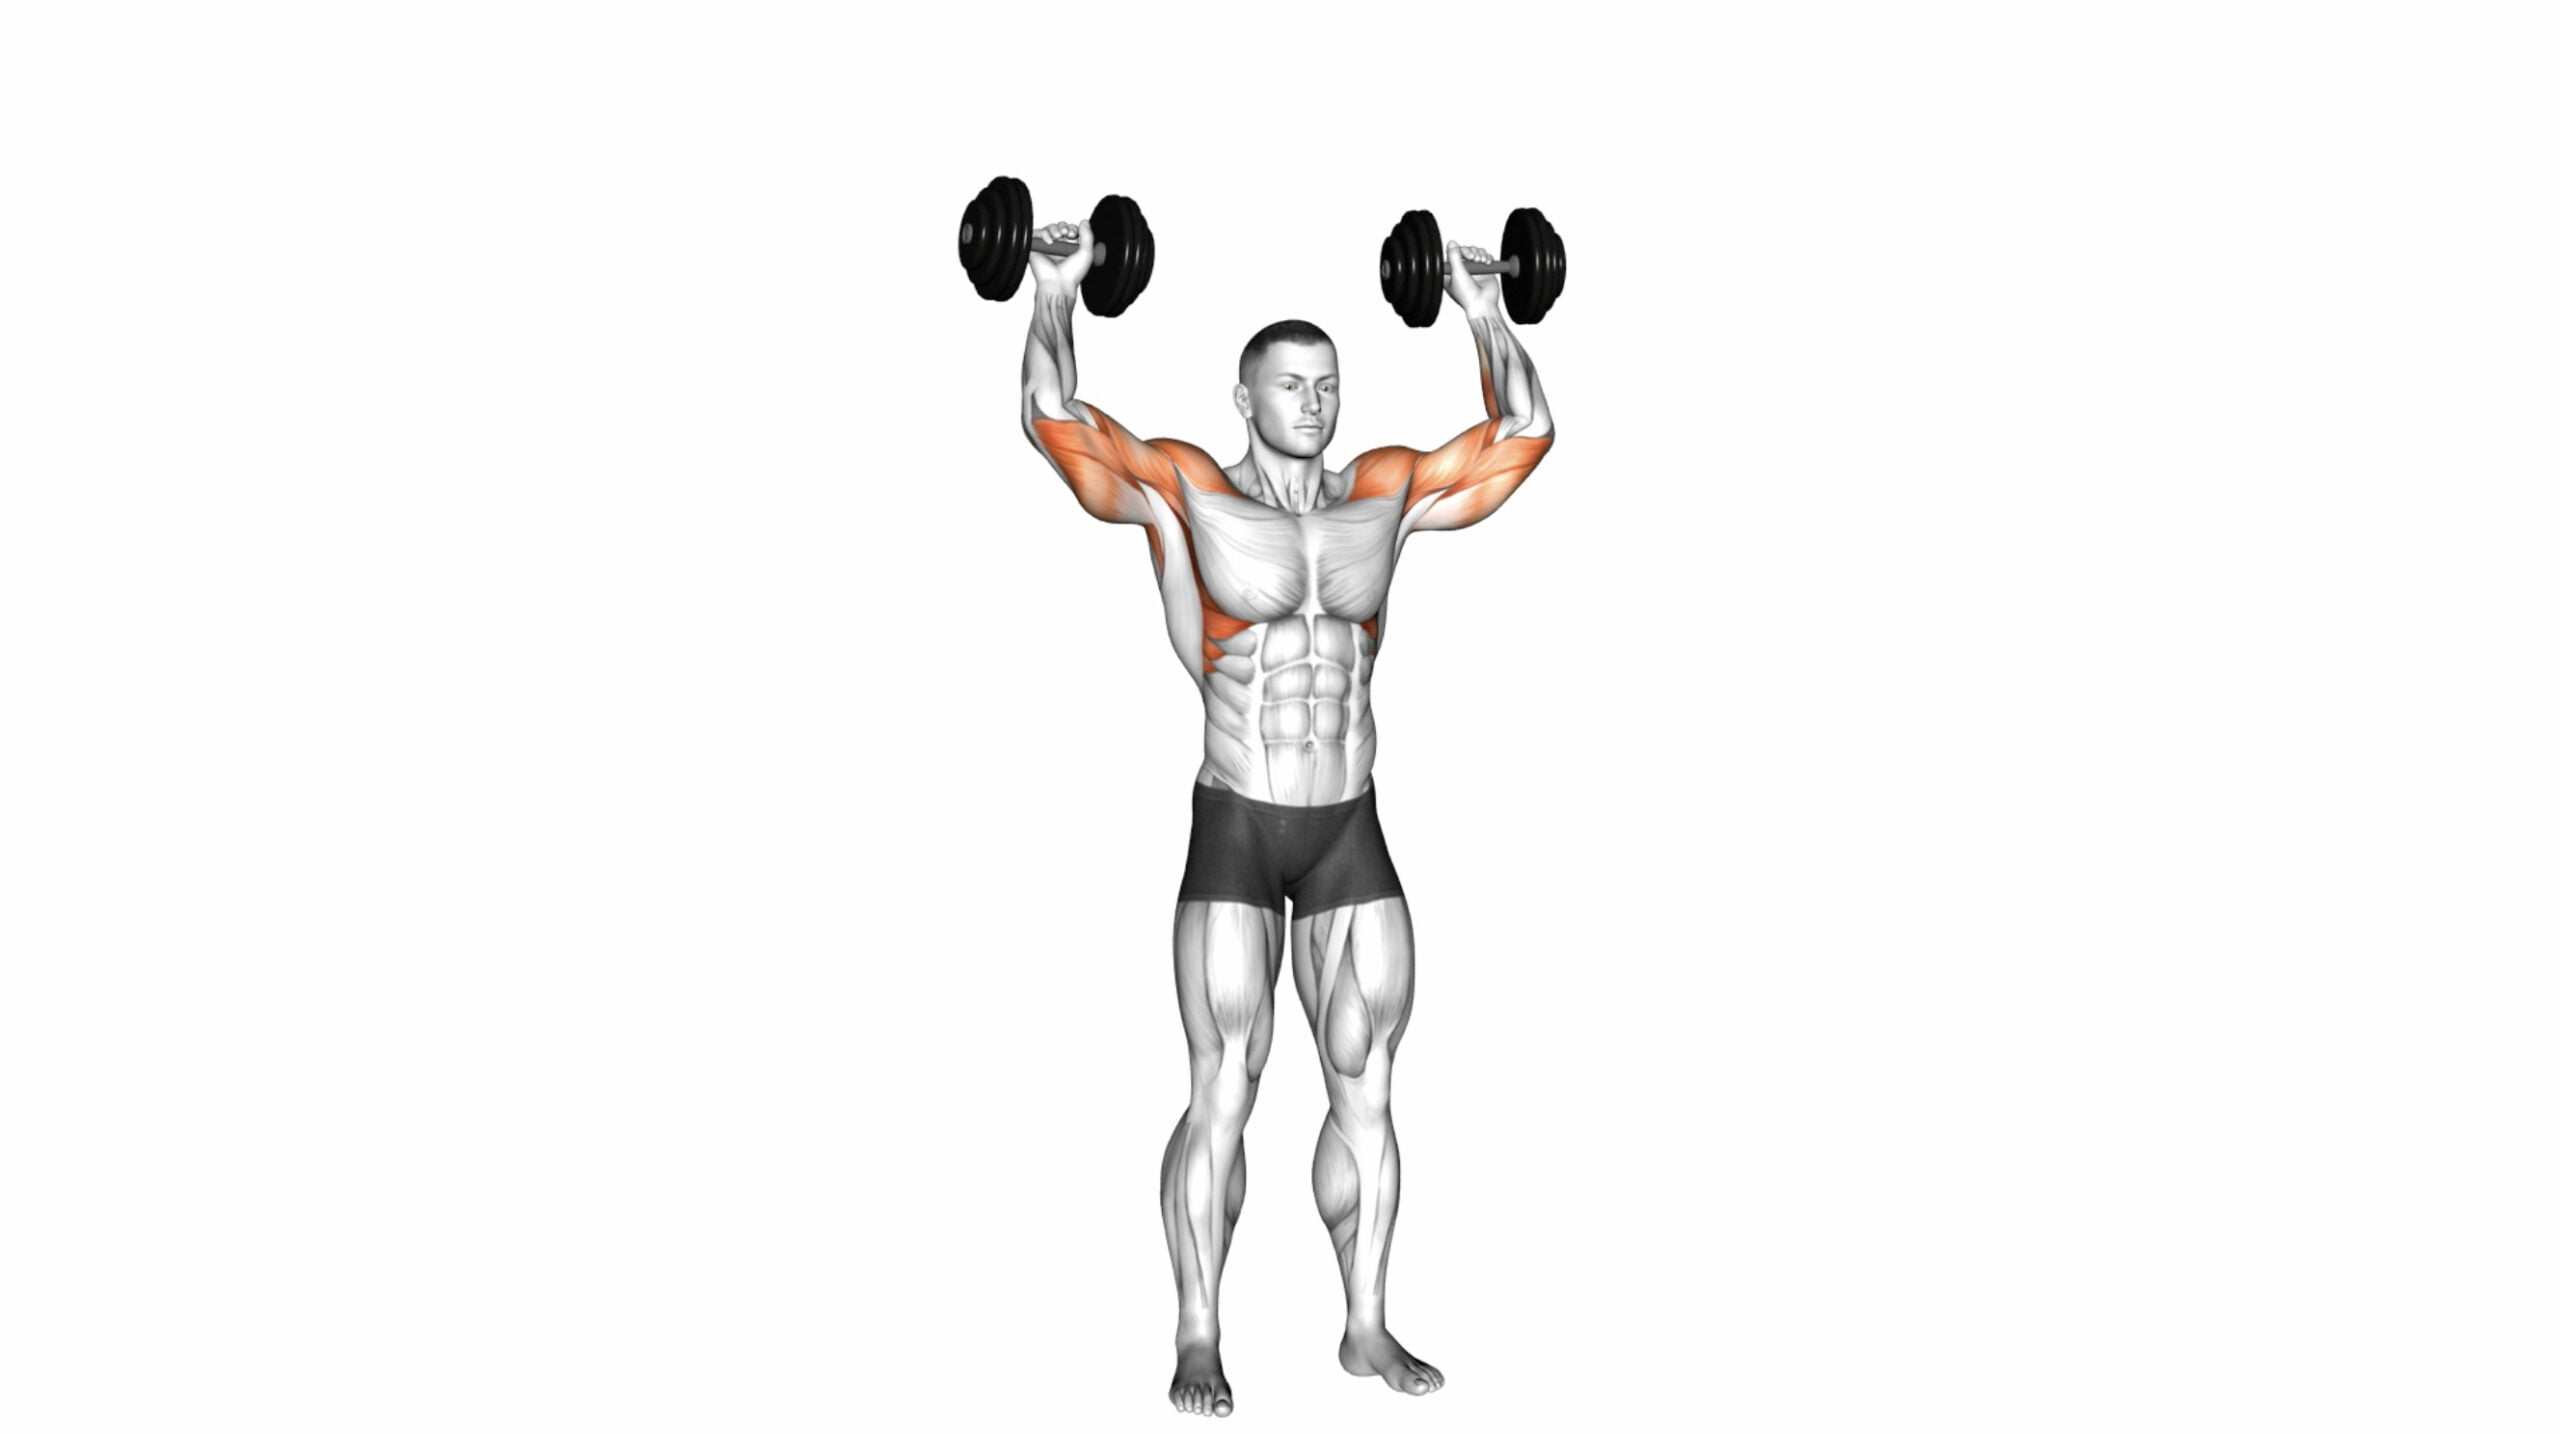 10 Vertical Push Exercises For Building Upper Body Strength And Muscle